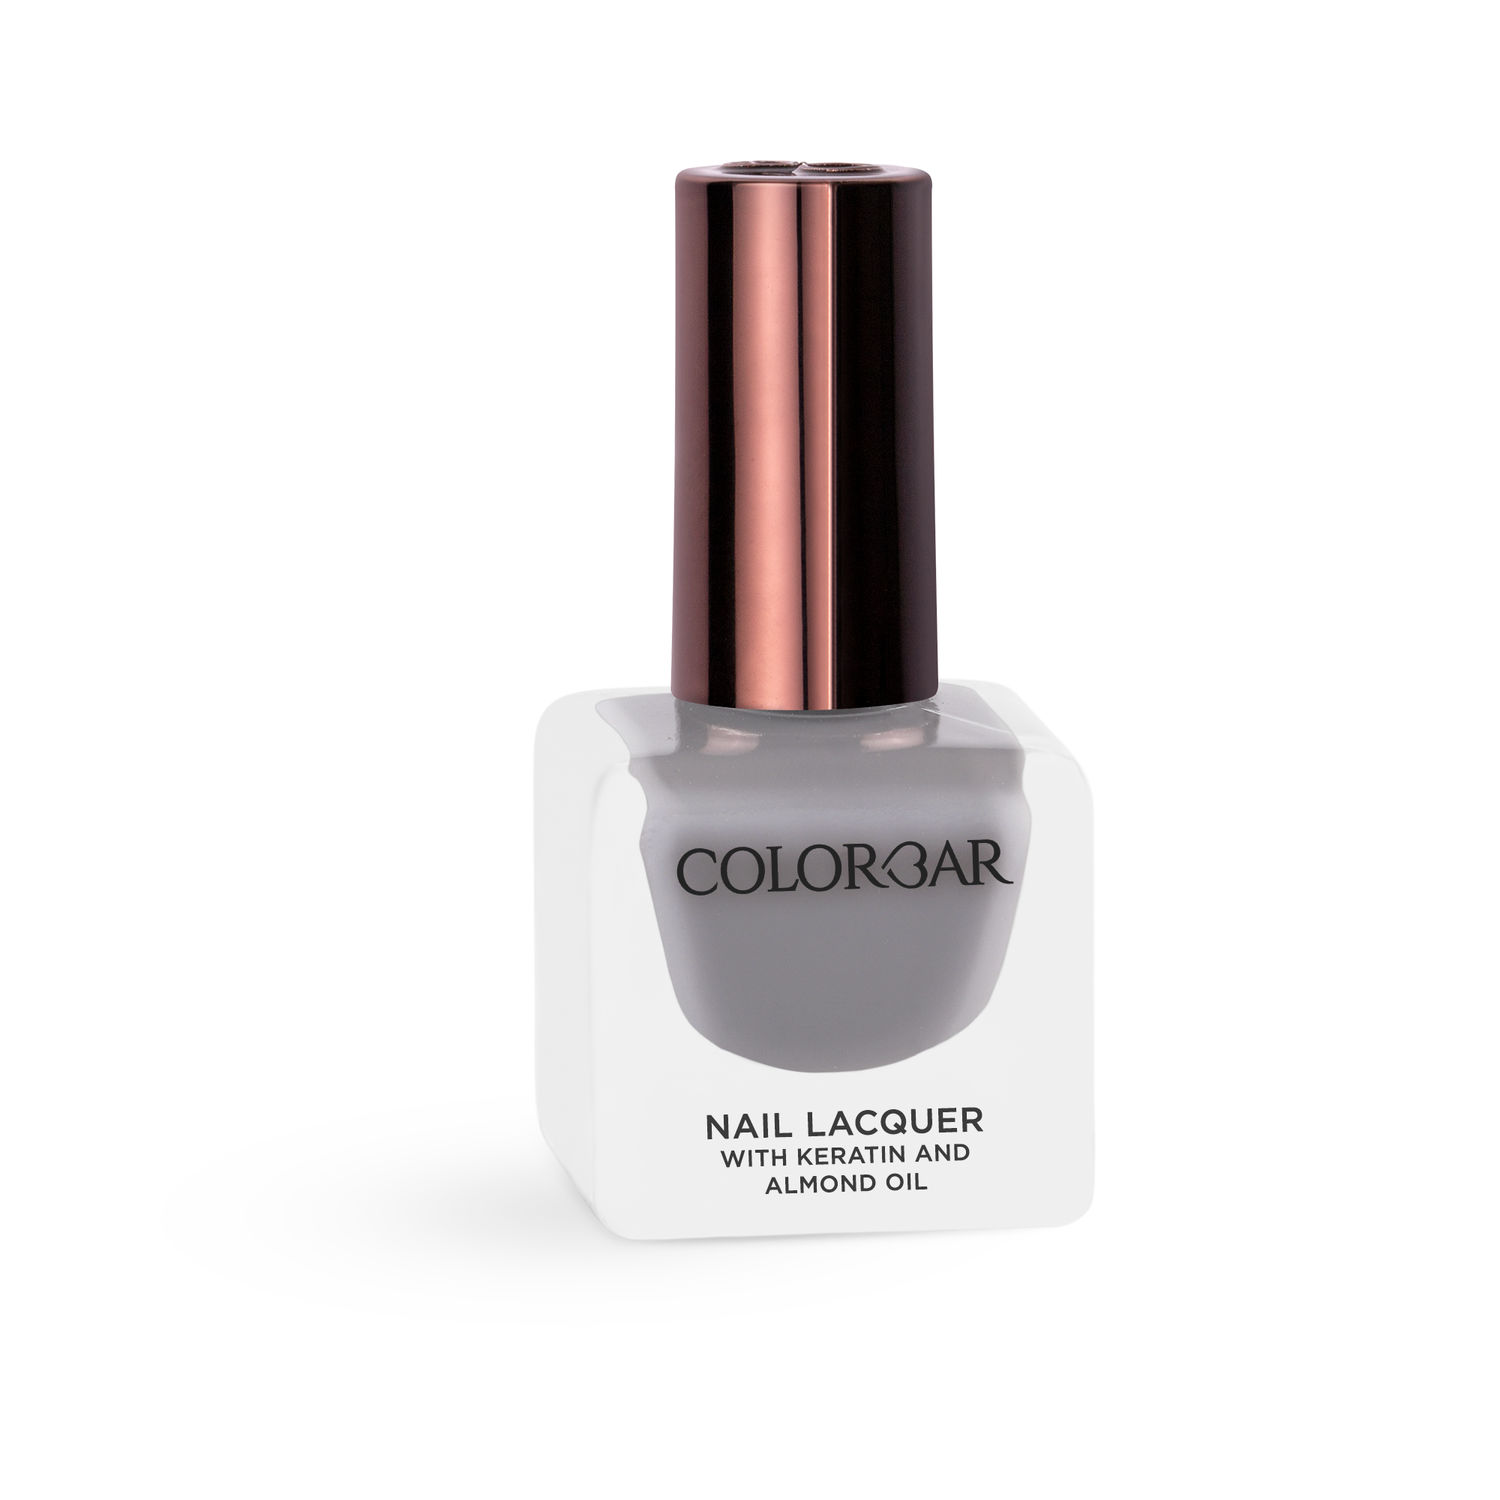 Buy Colorbar Lux Nail Lacquer Cbn1153 12 Ml Online at Discounted Price |  Netmeds